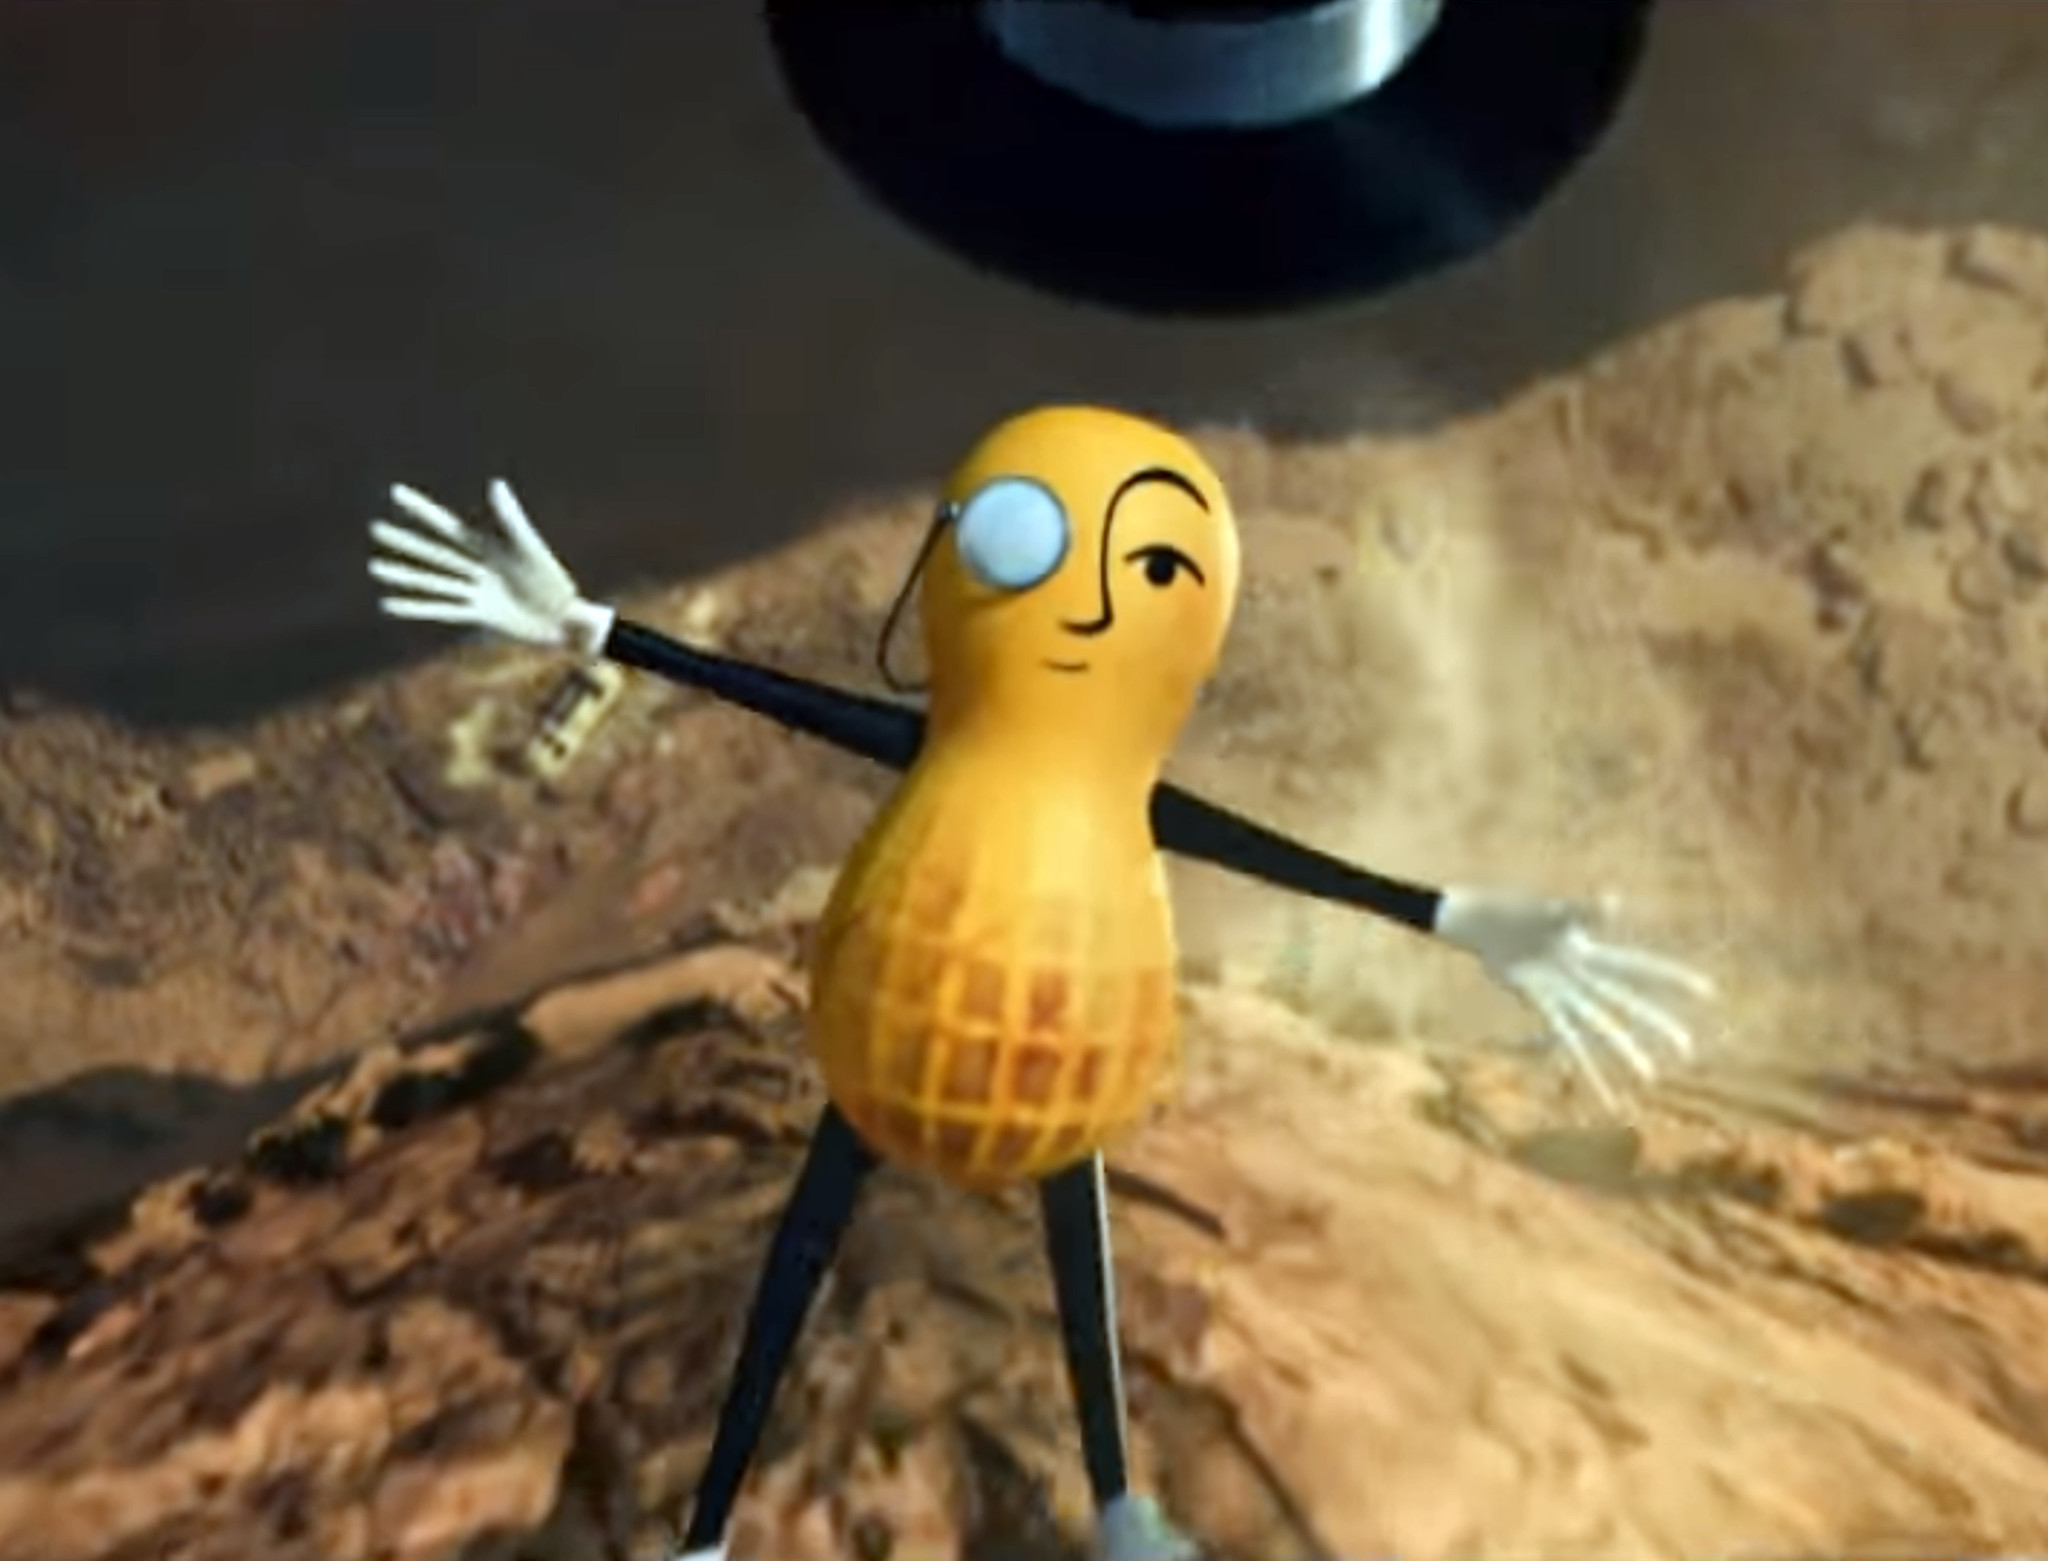 SEE IT: Mr. Peanut is killed in the saddest, most heroic Super Bowl commercial you’ll ever watch